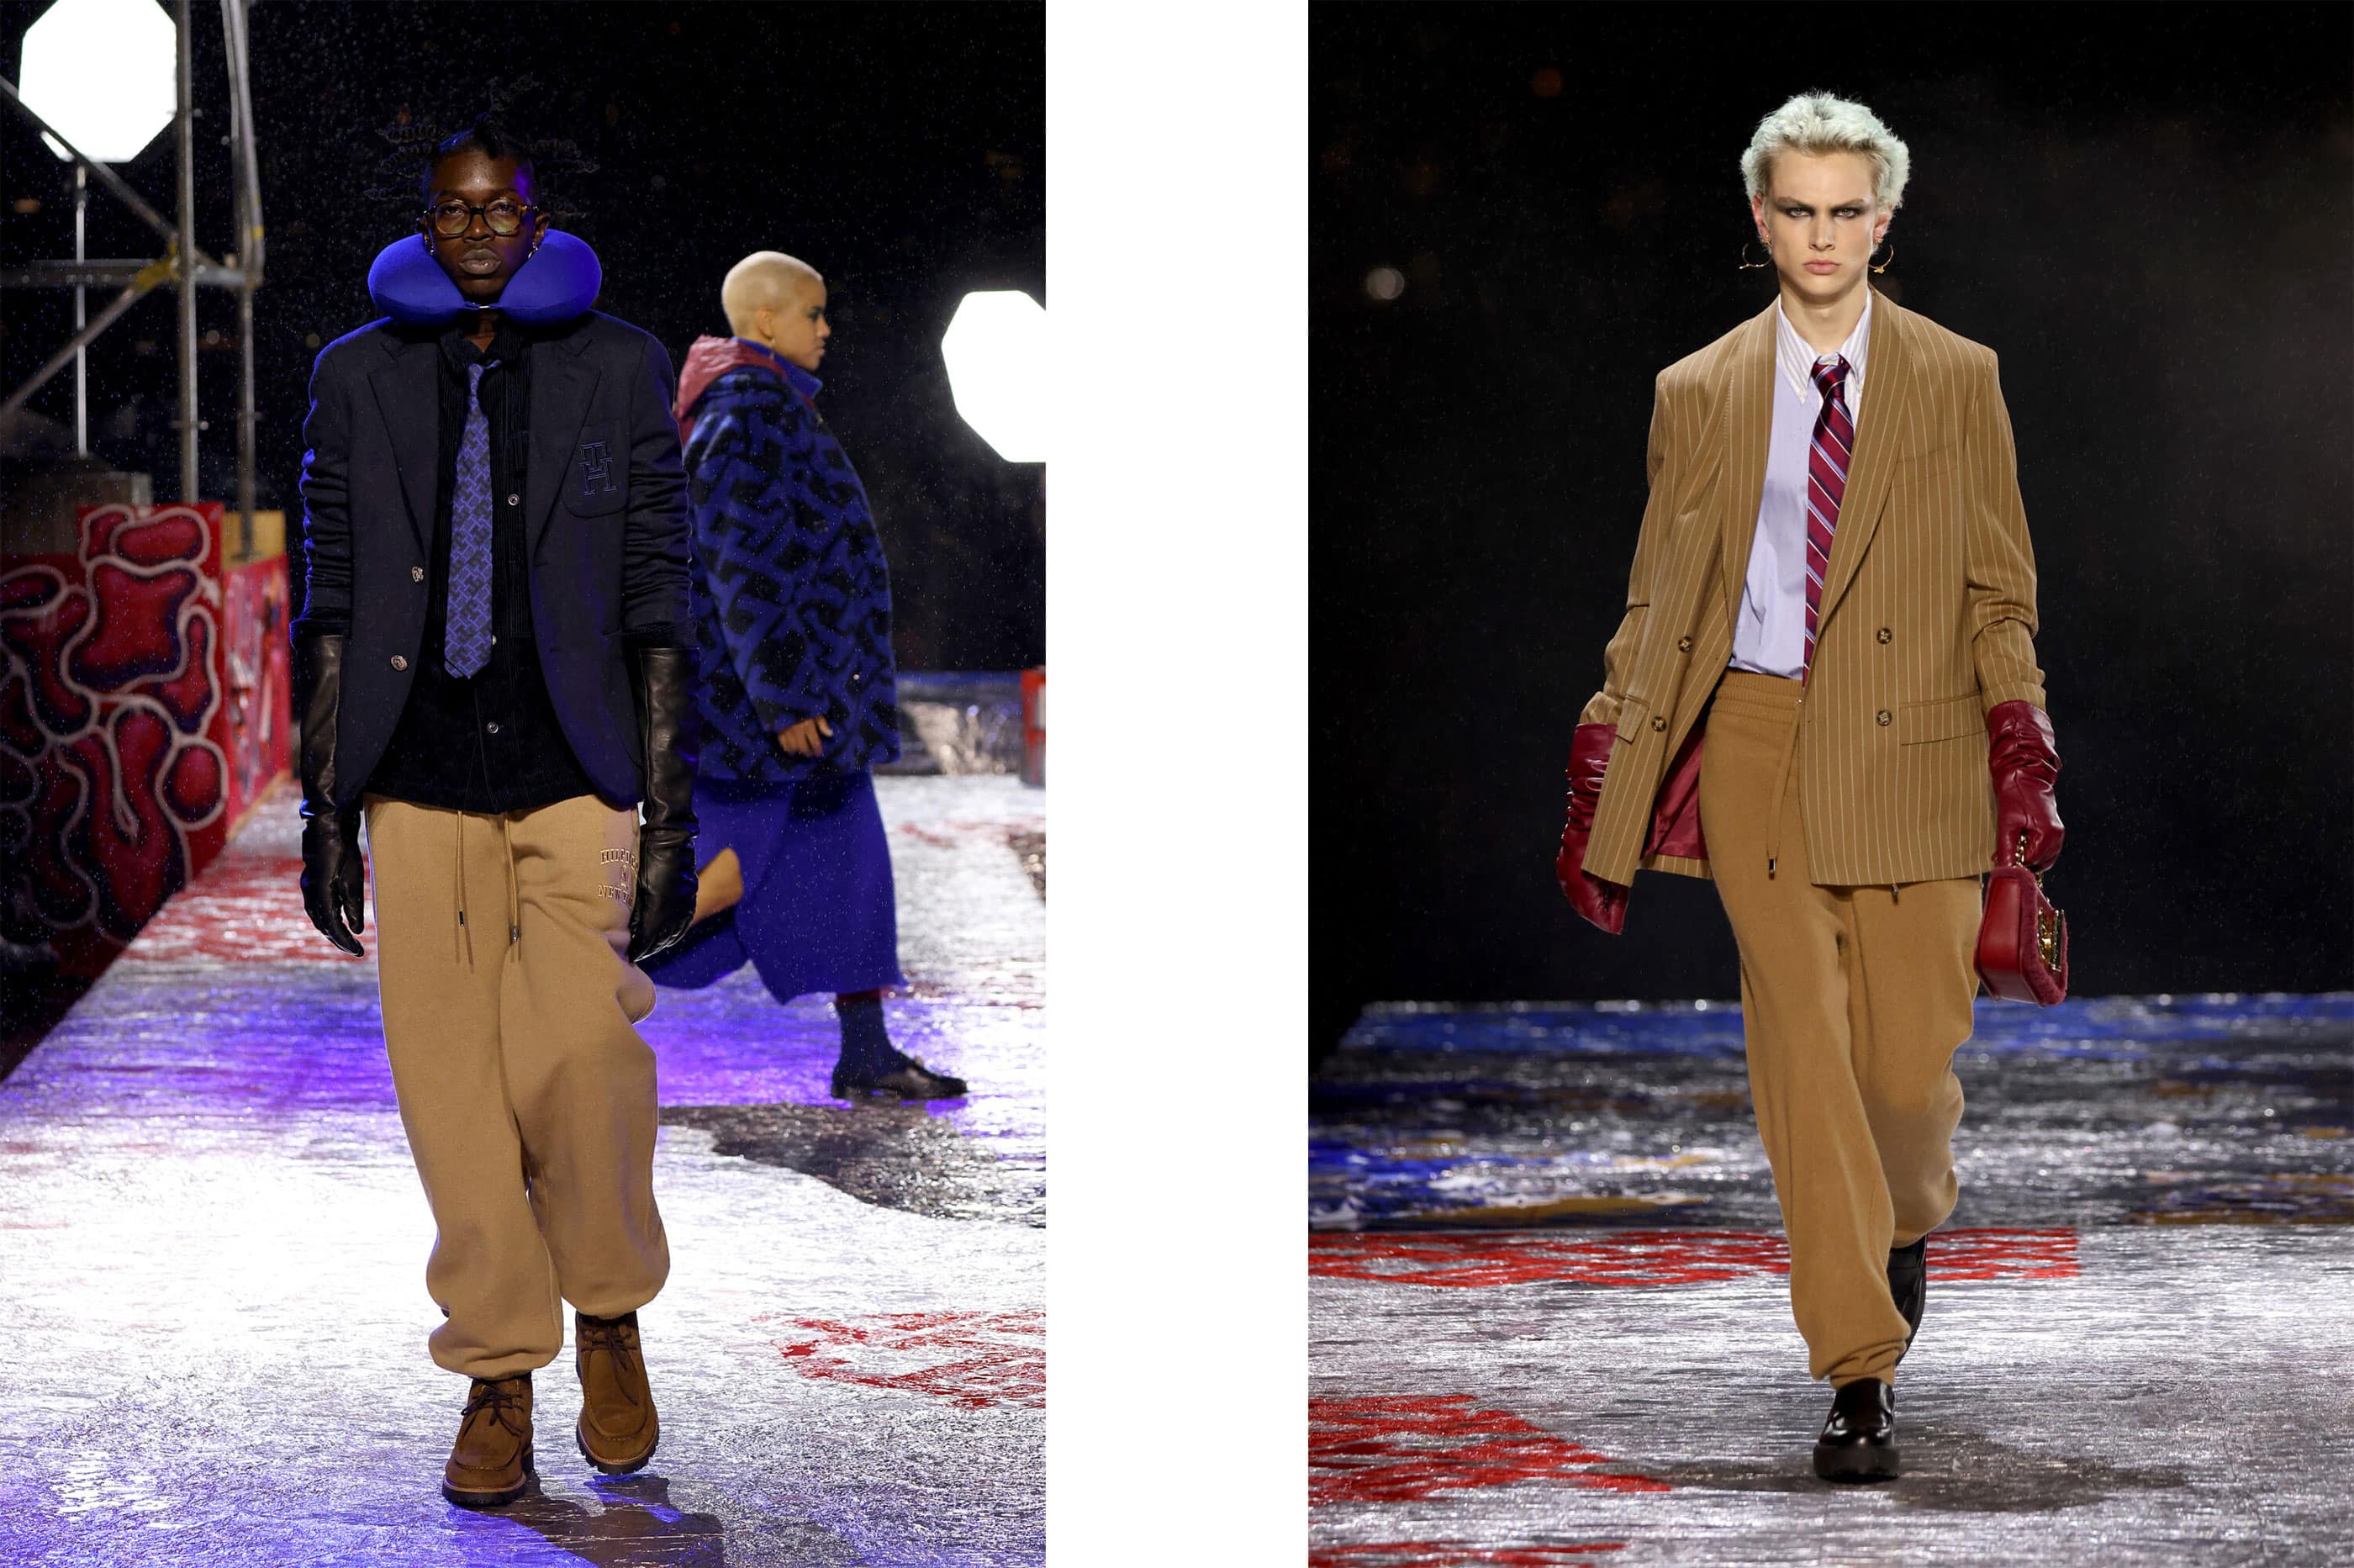 Tommy Hilfiger: 'I always thought cowboys were so cool